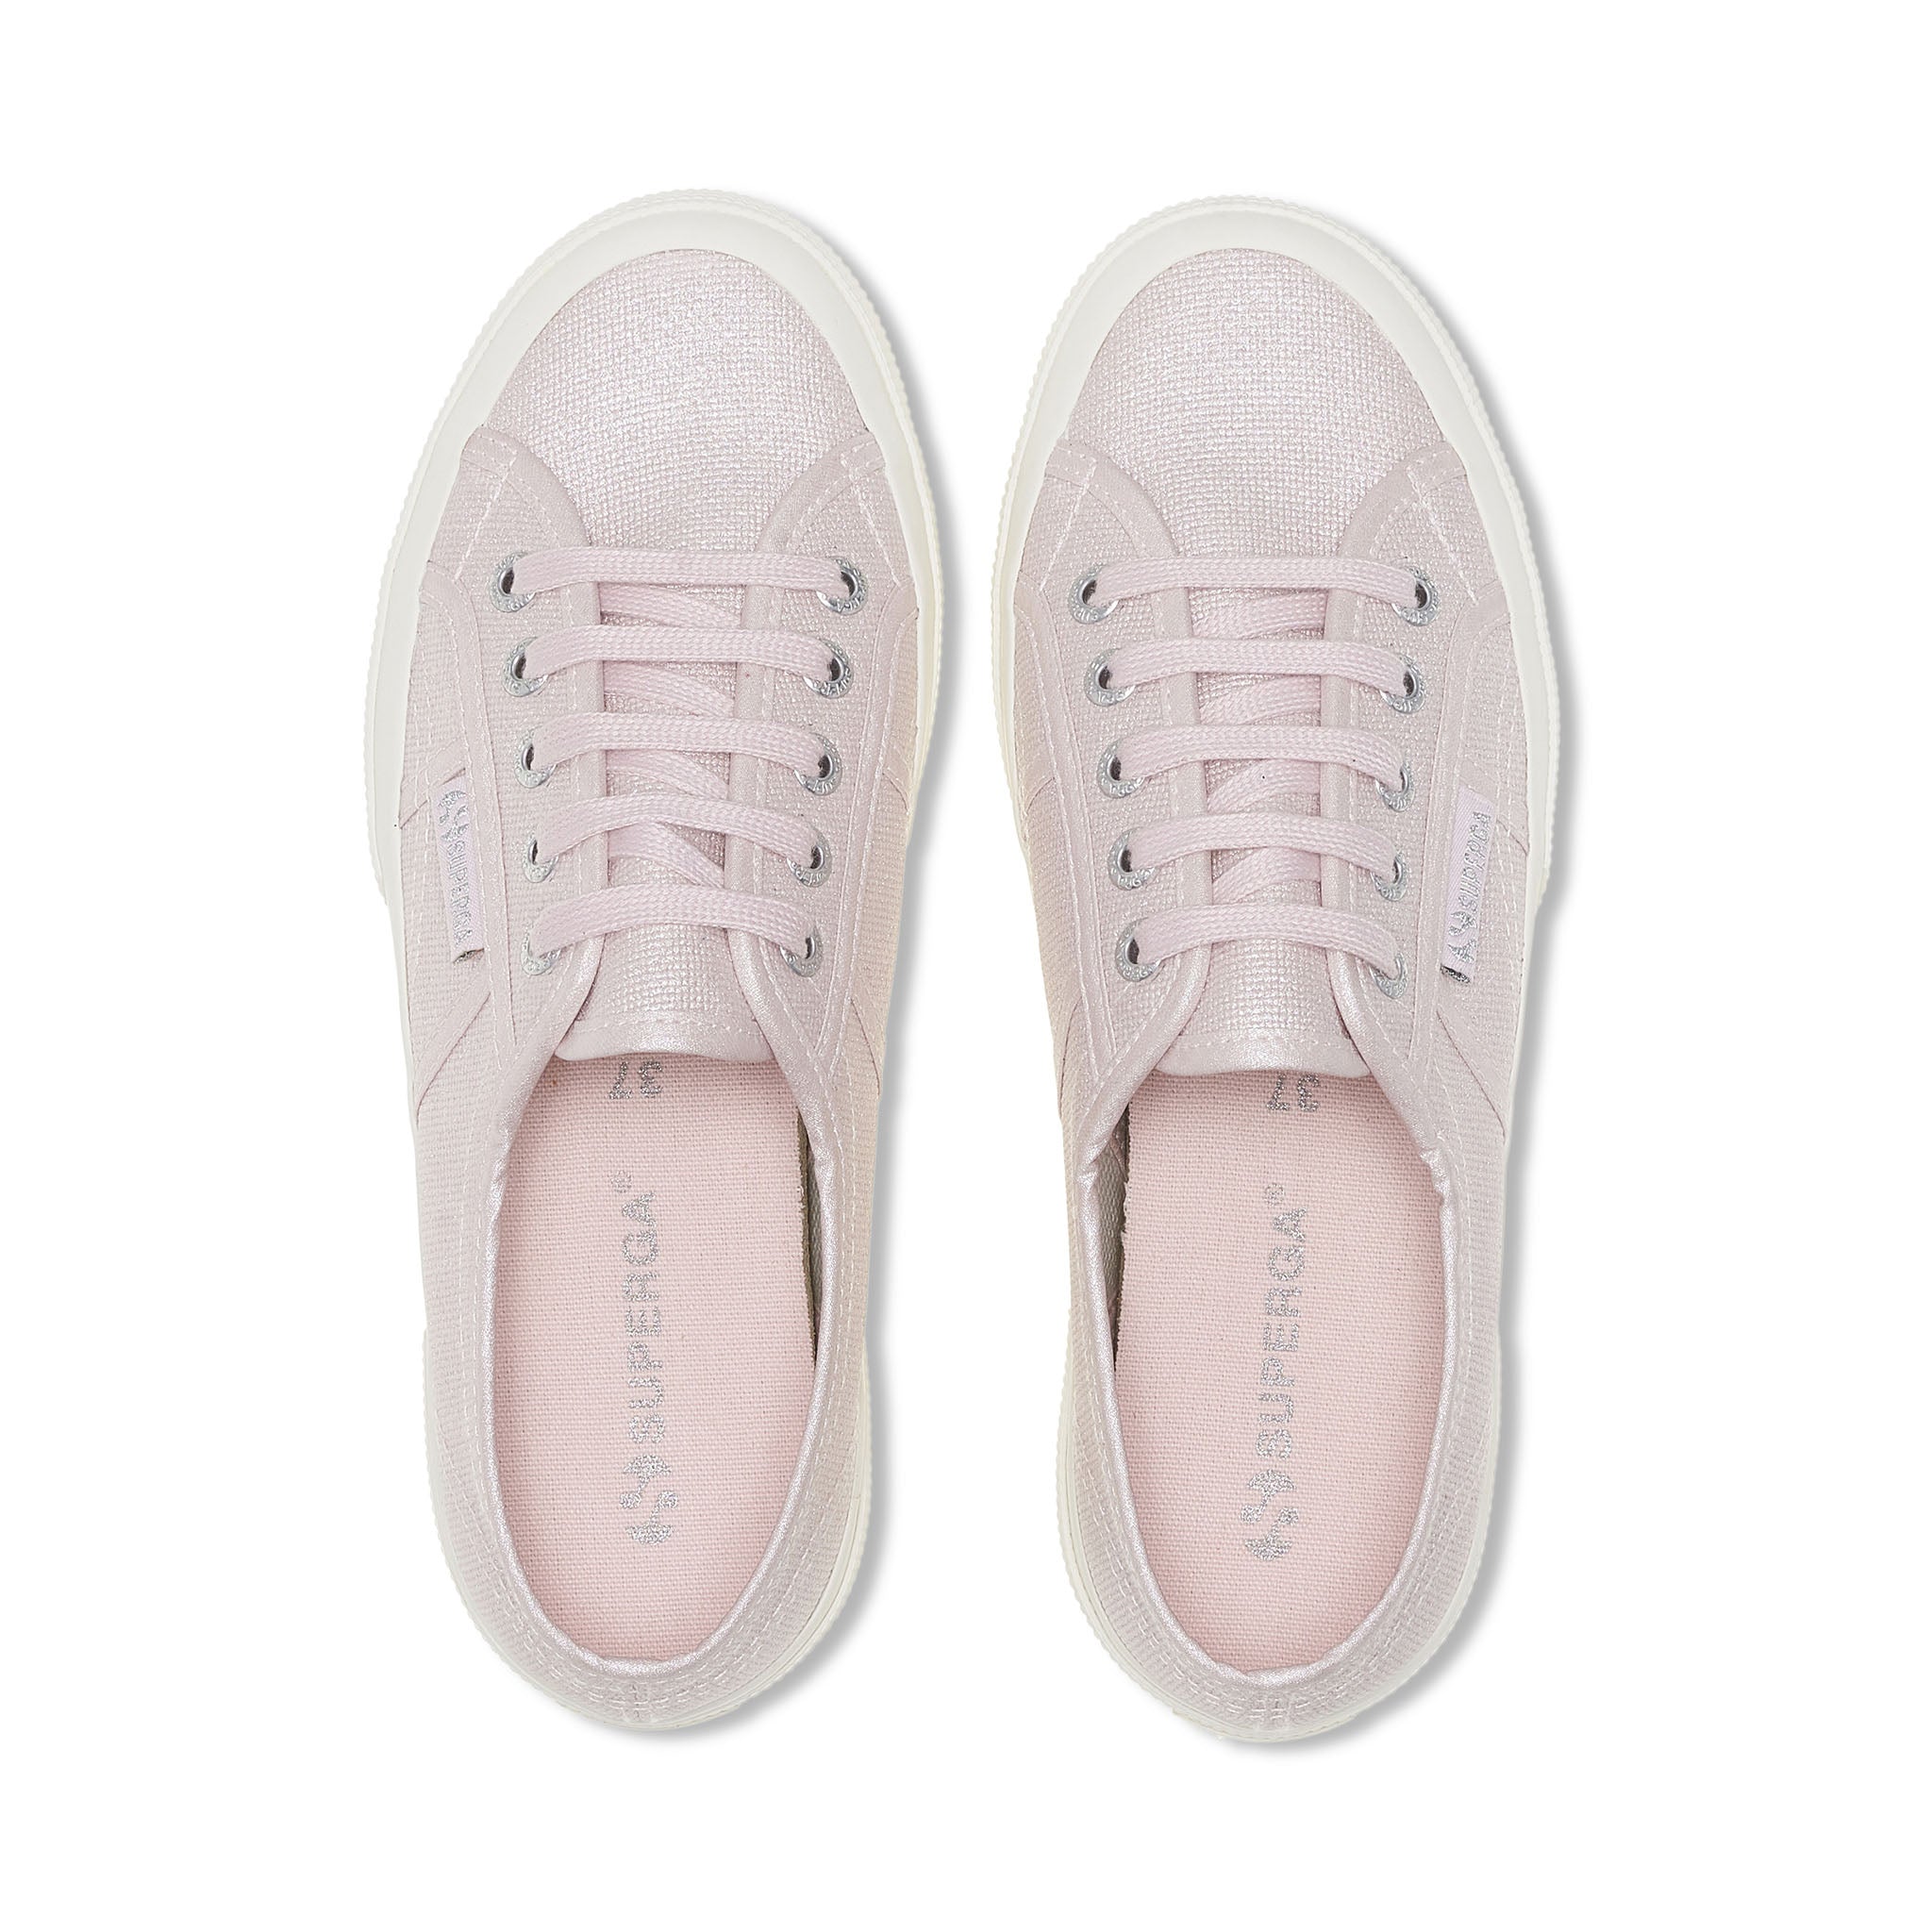 2750 Pearl Matte Canvas Sneakers - Violet Hushed Avorio